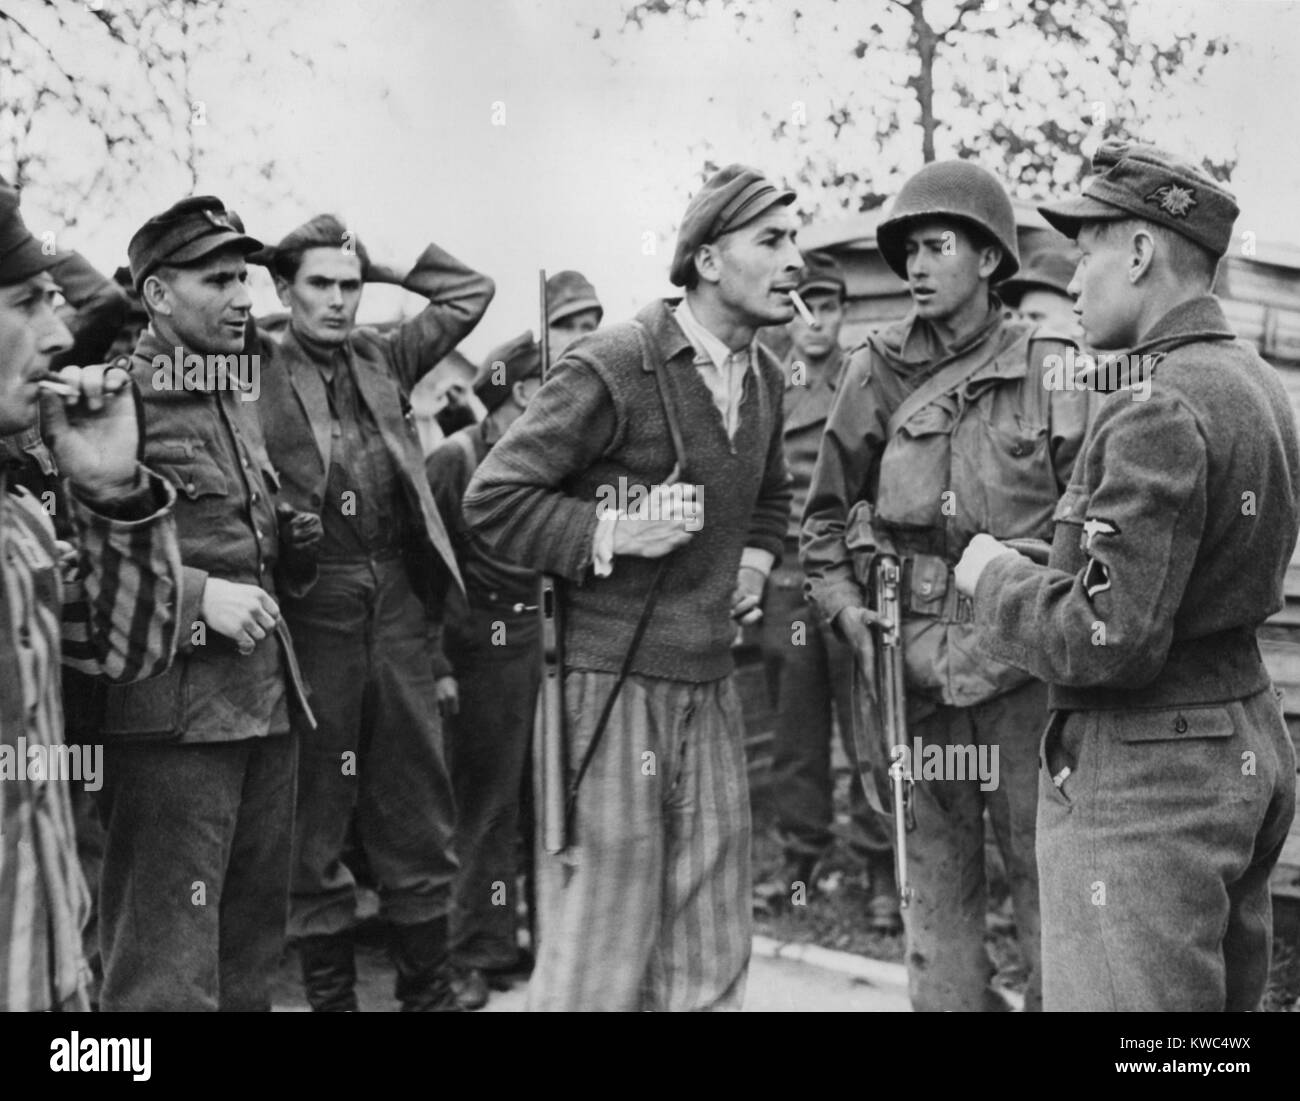 Freed Polish prisoner (center) of Dachau confronts a Nazi SS trooper for mistreatment of inmates. Still wearing his the striped trousers of his prison uniform, he has a rifle slung over his shoulder. A soldier of the Seventh US Army stands by. April 29, 1945, World War 2 (BSLOC 2015 13 14) Stock Photo